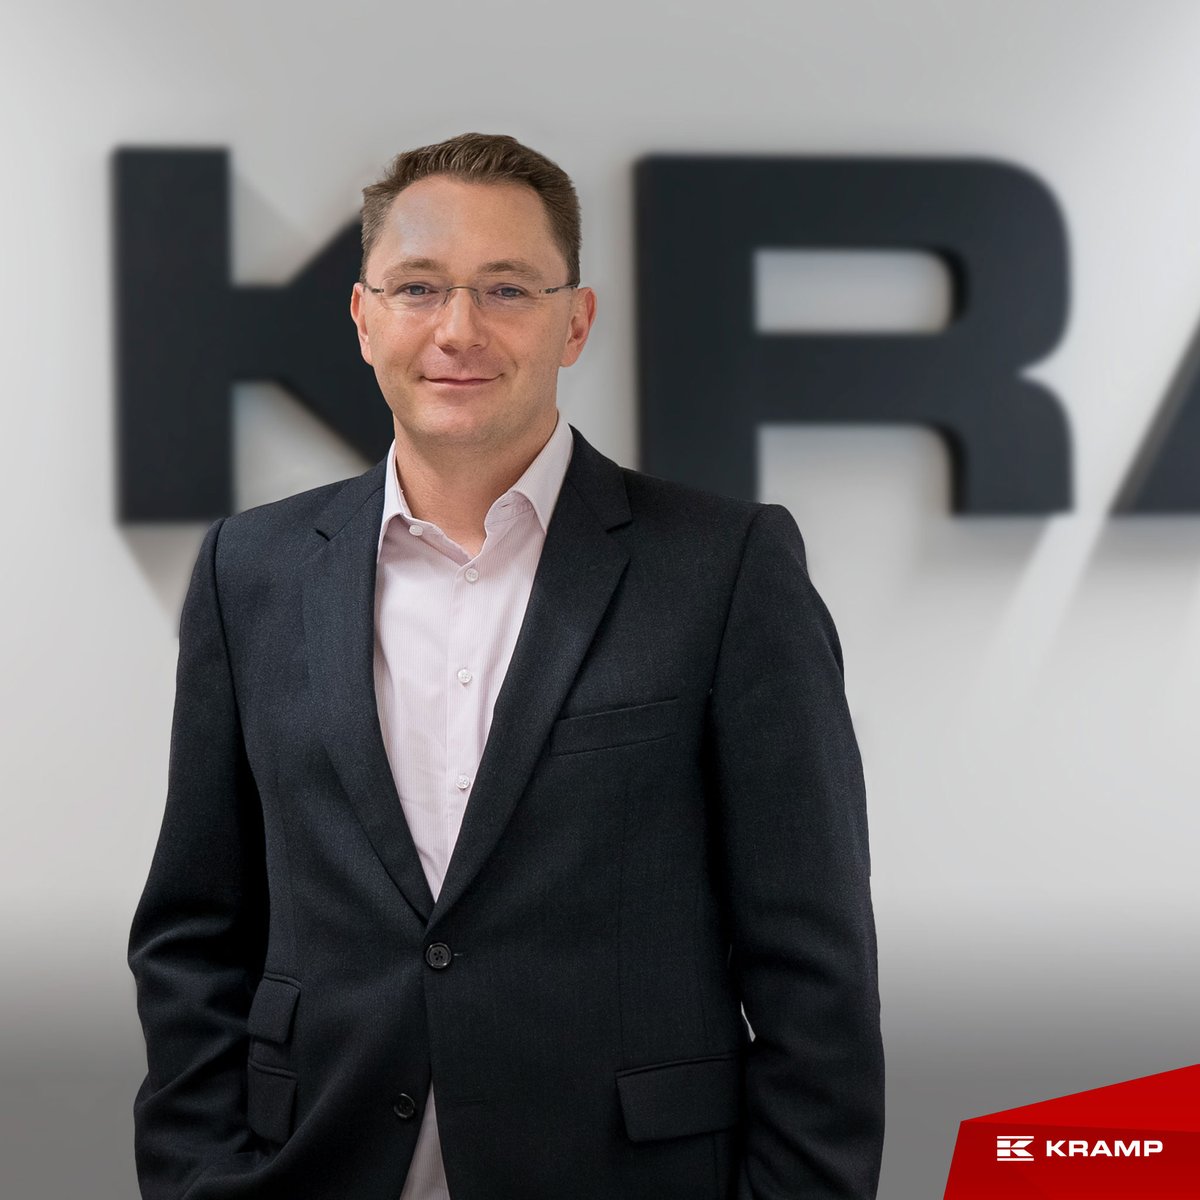 We are proud to announce that Olivier Luxon joins Kramp as the new Chief Technology Officer (CTO). We are sure that Olivier will add a lot of value to our digital transformation as an industry-leading digital company. Welcome to the Kramp family, Olivier! kramp.com/shop-gb/en/n/n…